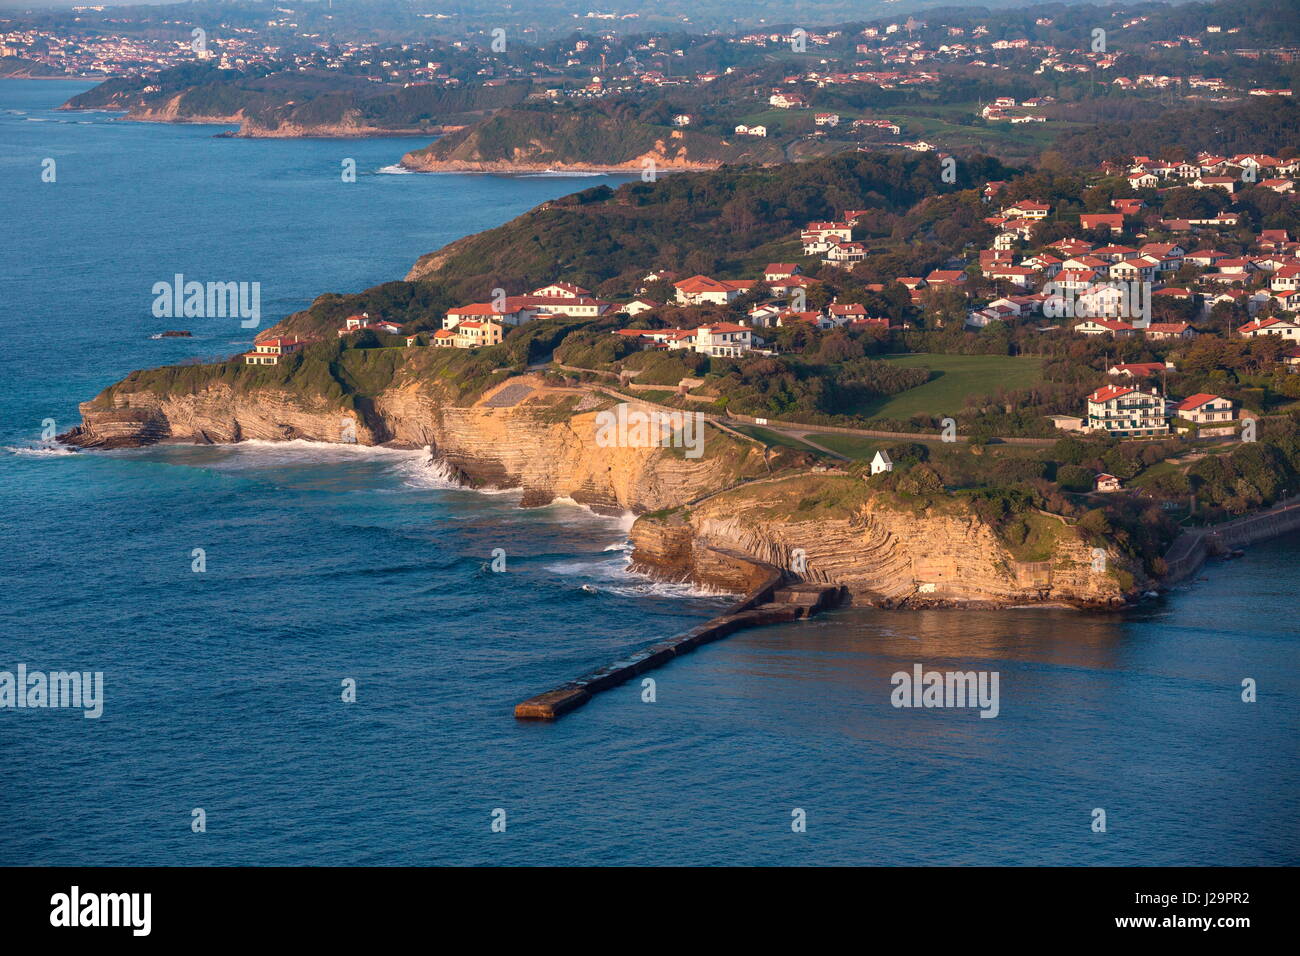 France, South-western France, Basque Country, Pointe de Sainte Barbe  overlooking the bay of Saint-Jean de Luz. Basque Coast up to Biarritz in  the background Stock Photo - Alamy